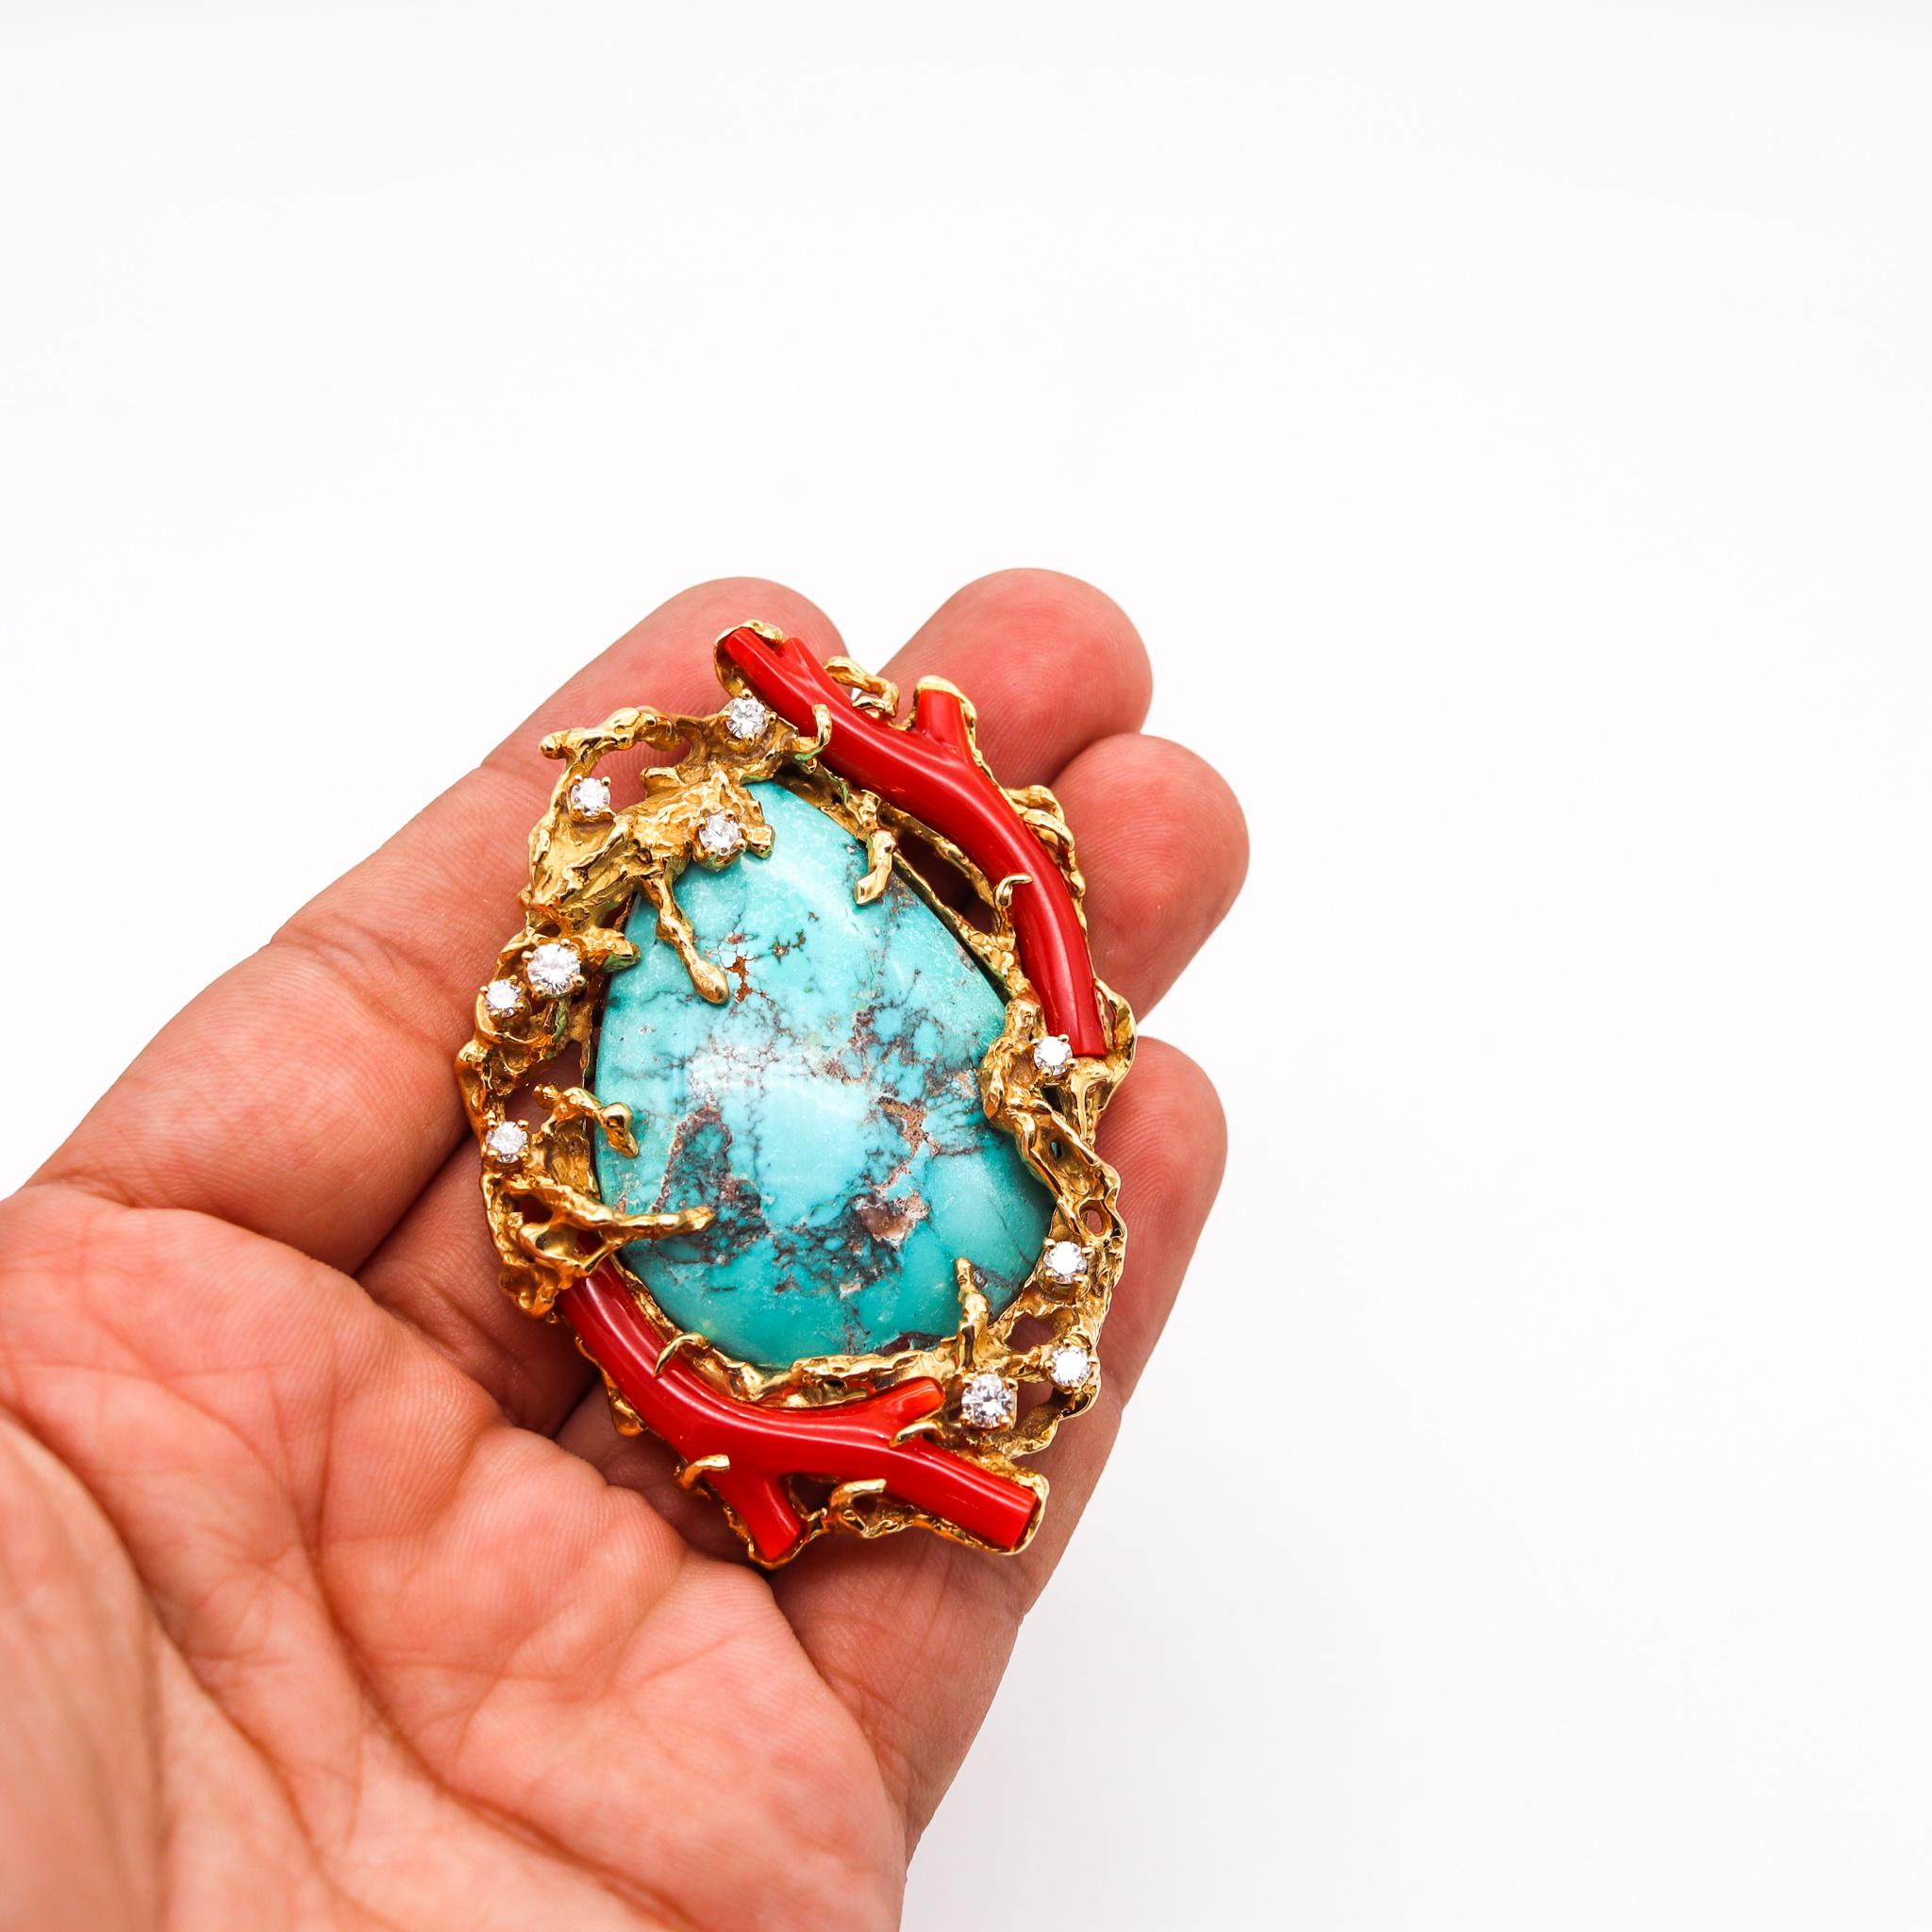 Cabochon Arthur King 1960 Organic Piece 18Kt Gold with 106.41 Ct Diamonds Turquoise Coral For Sale